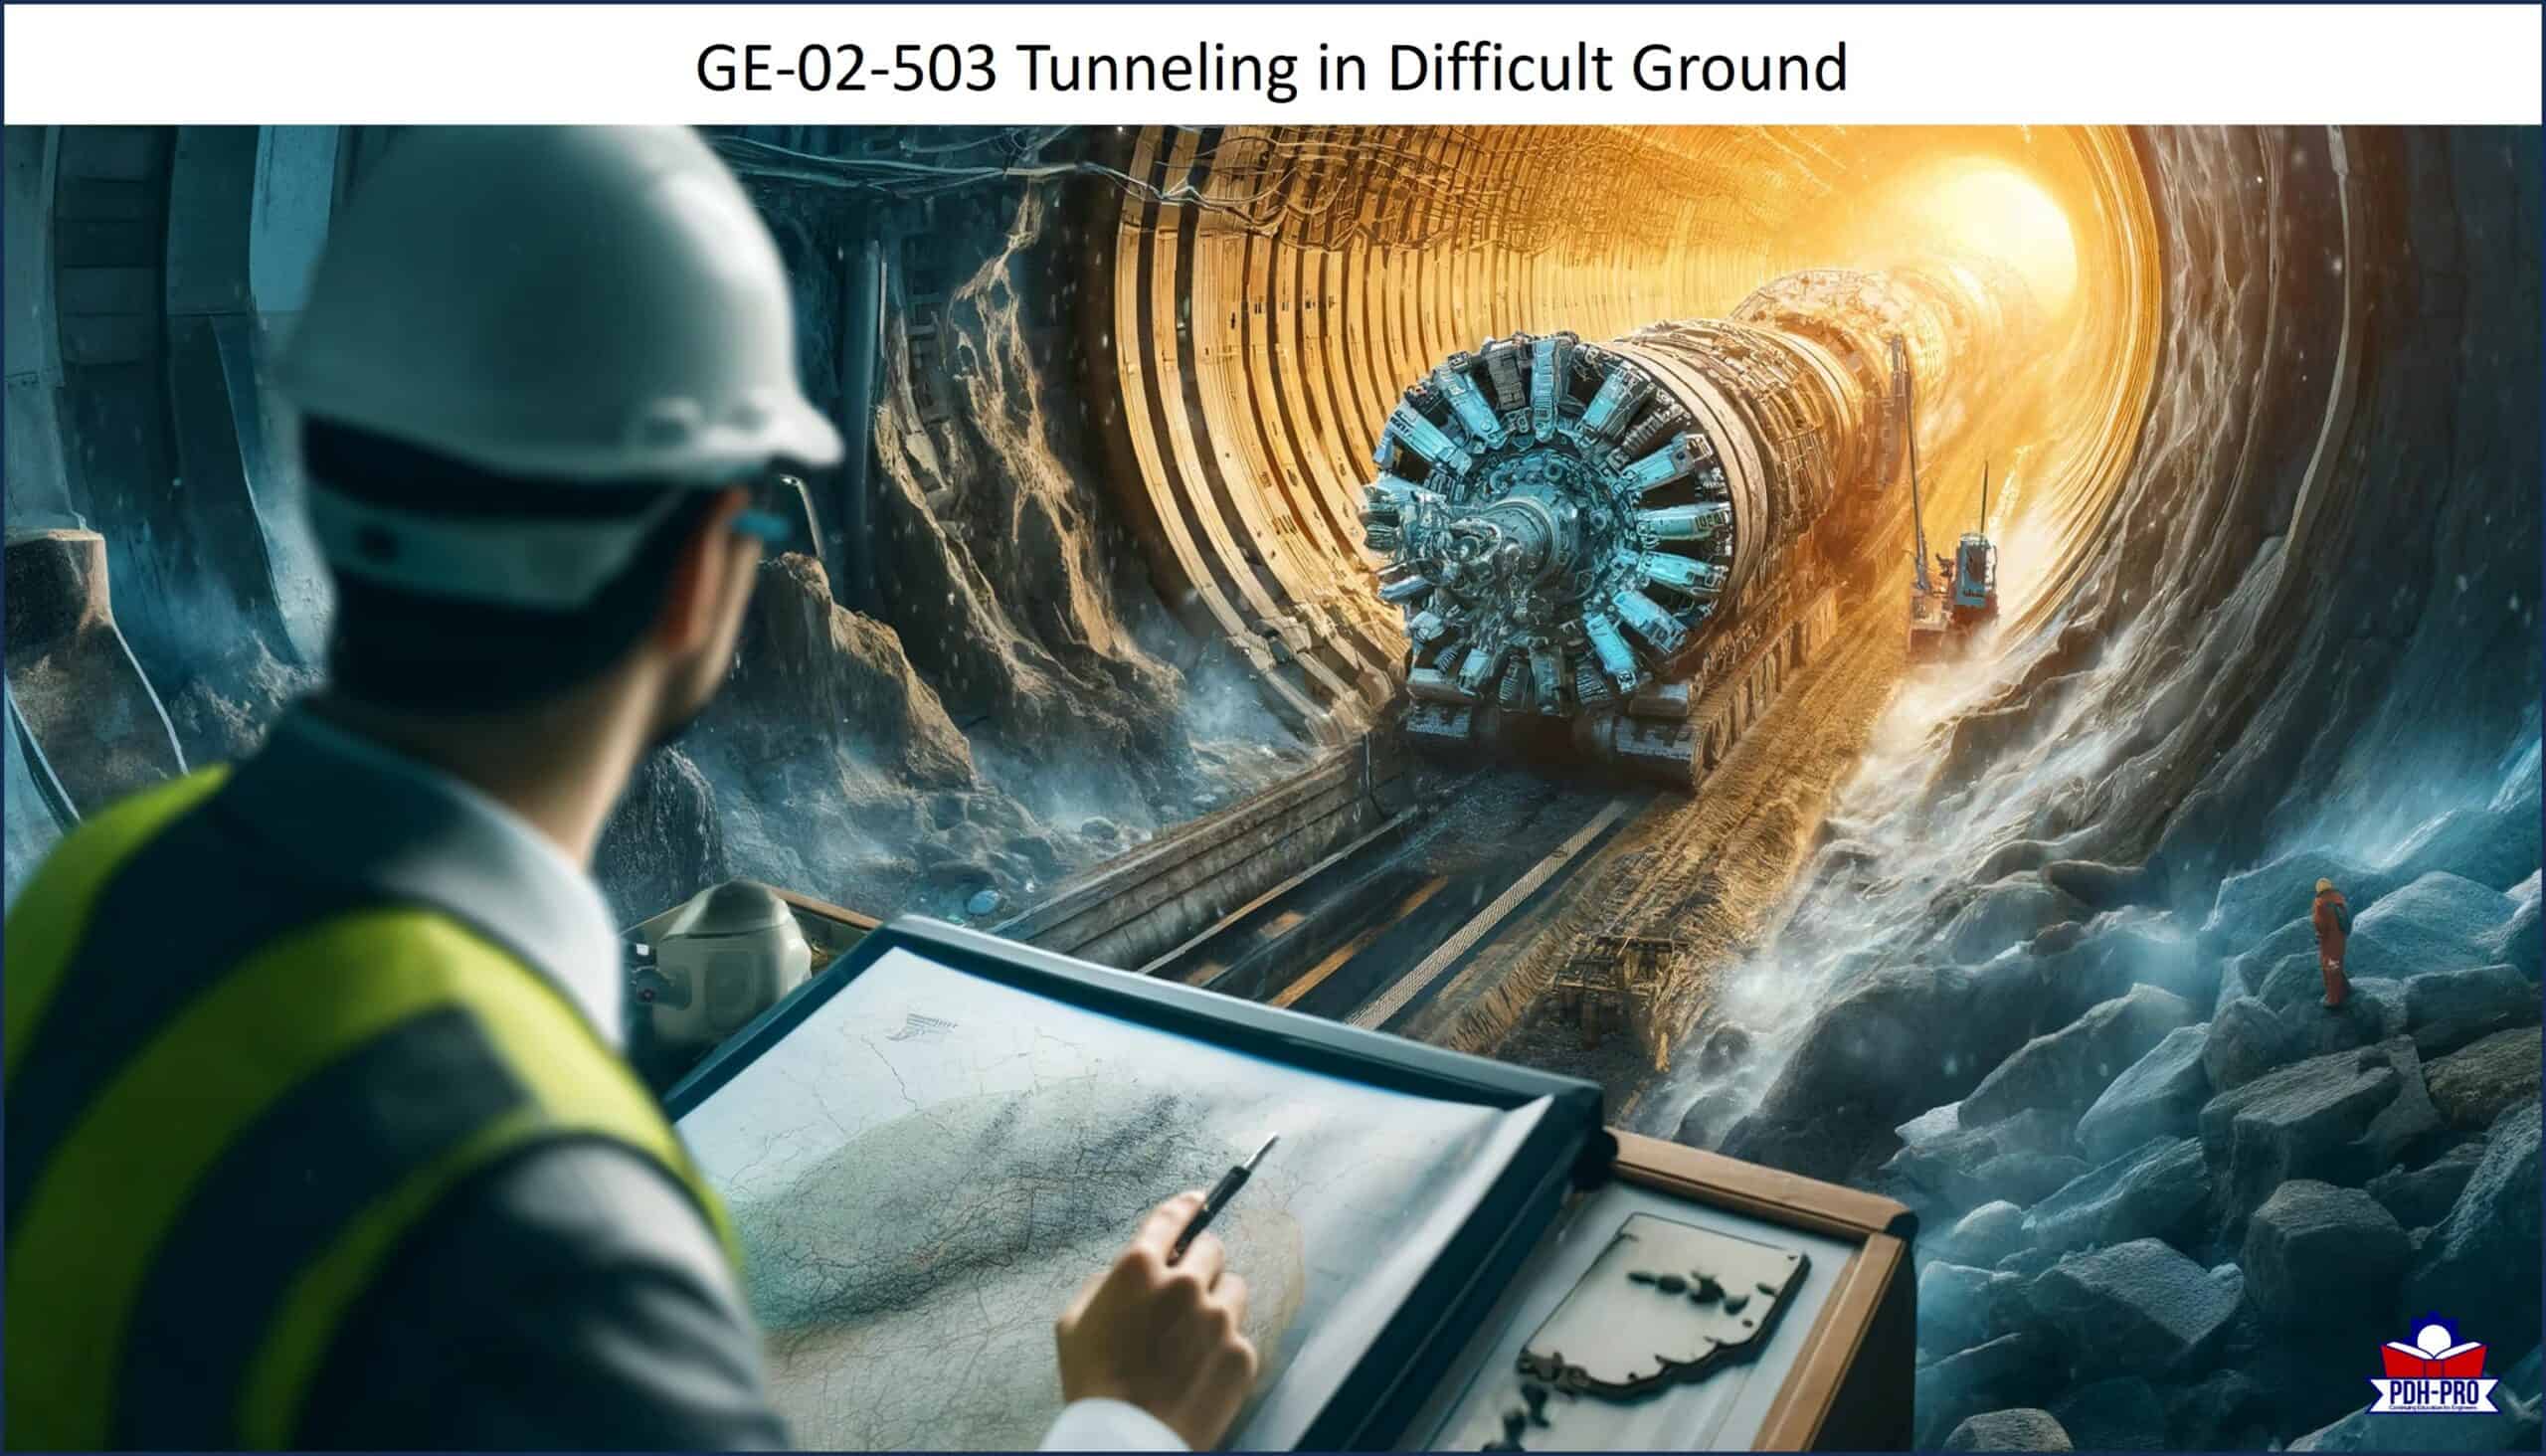 Tunneling in Difficult Ground